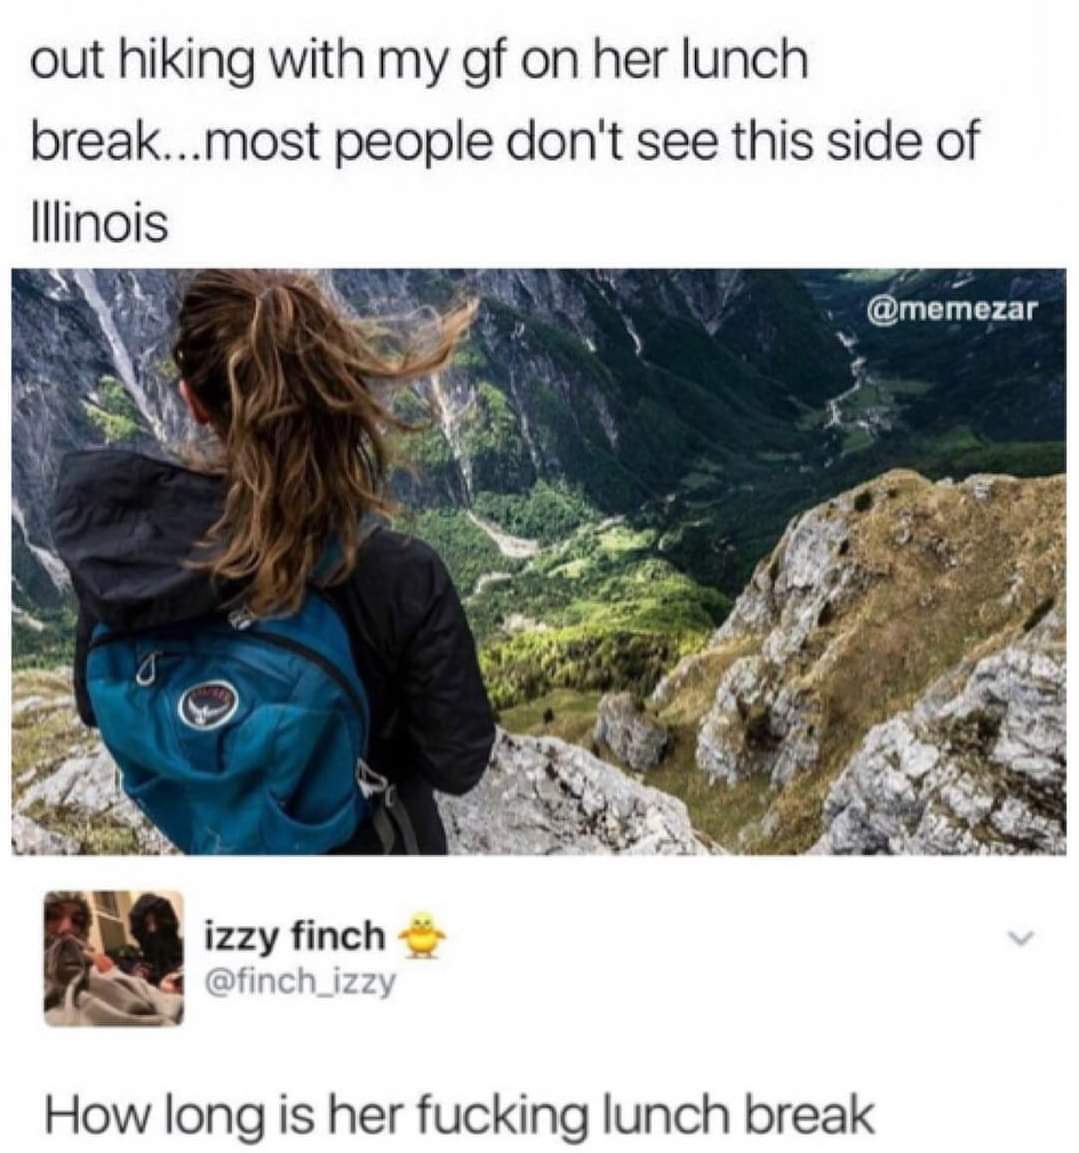 I wouldn't hike, even on my day off - meme